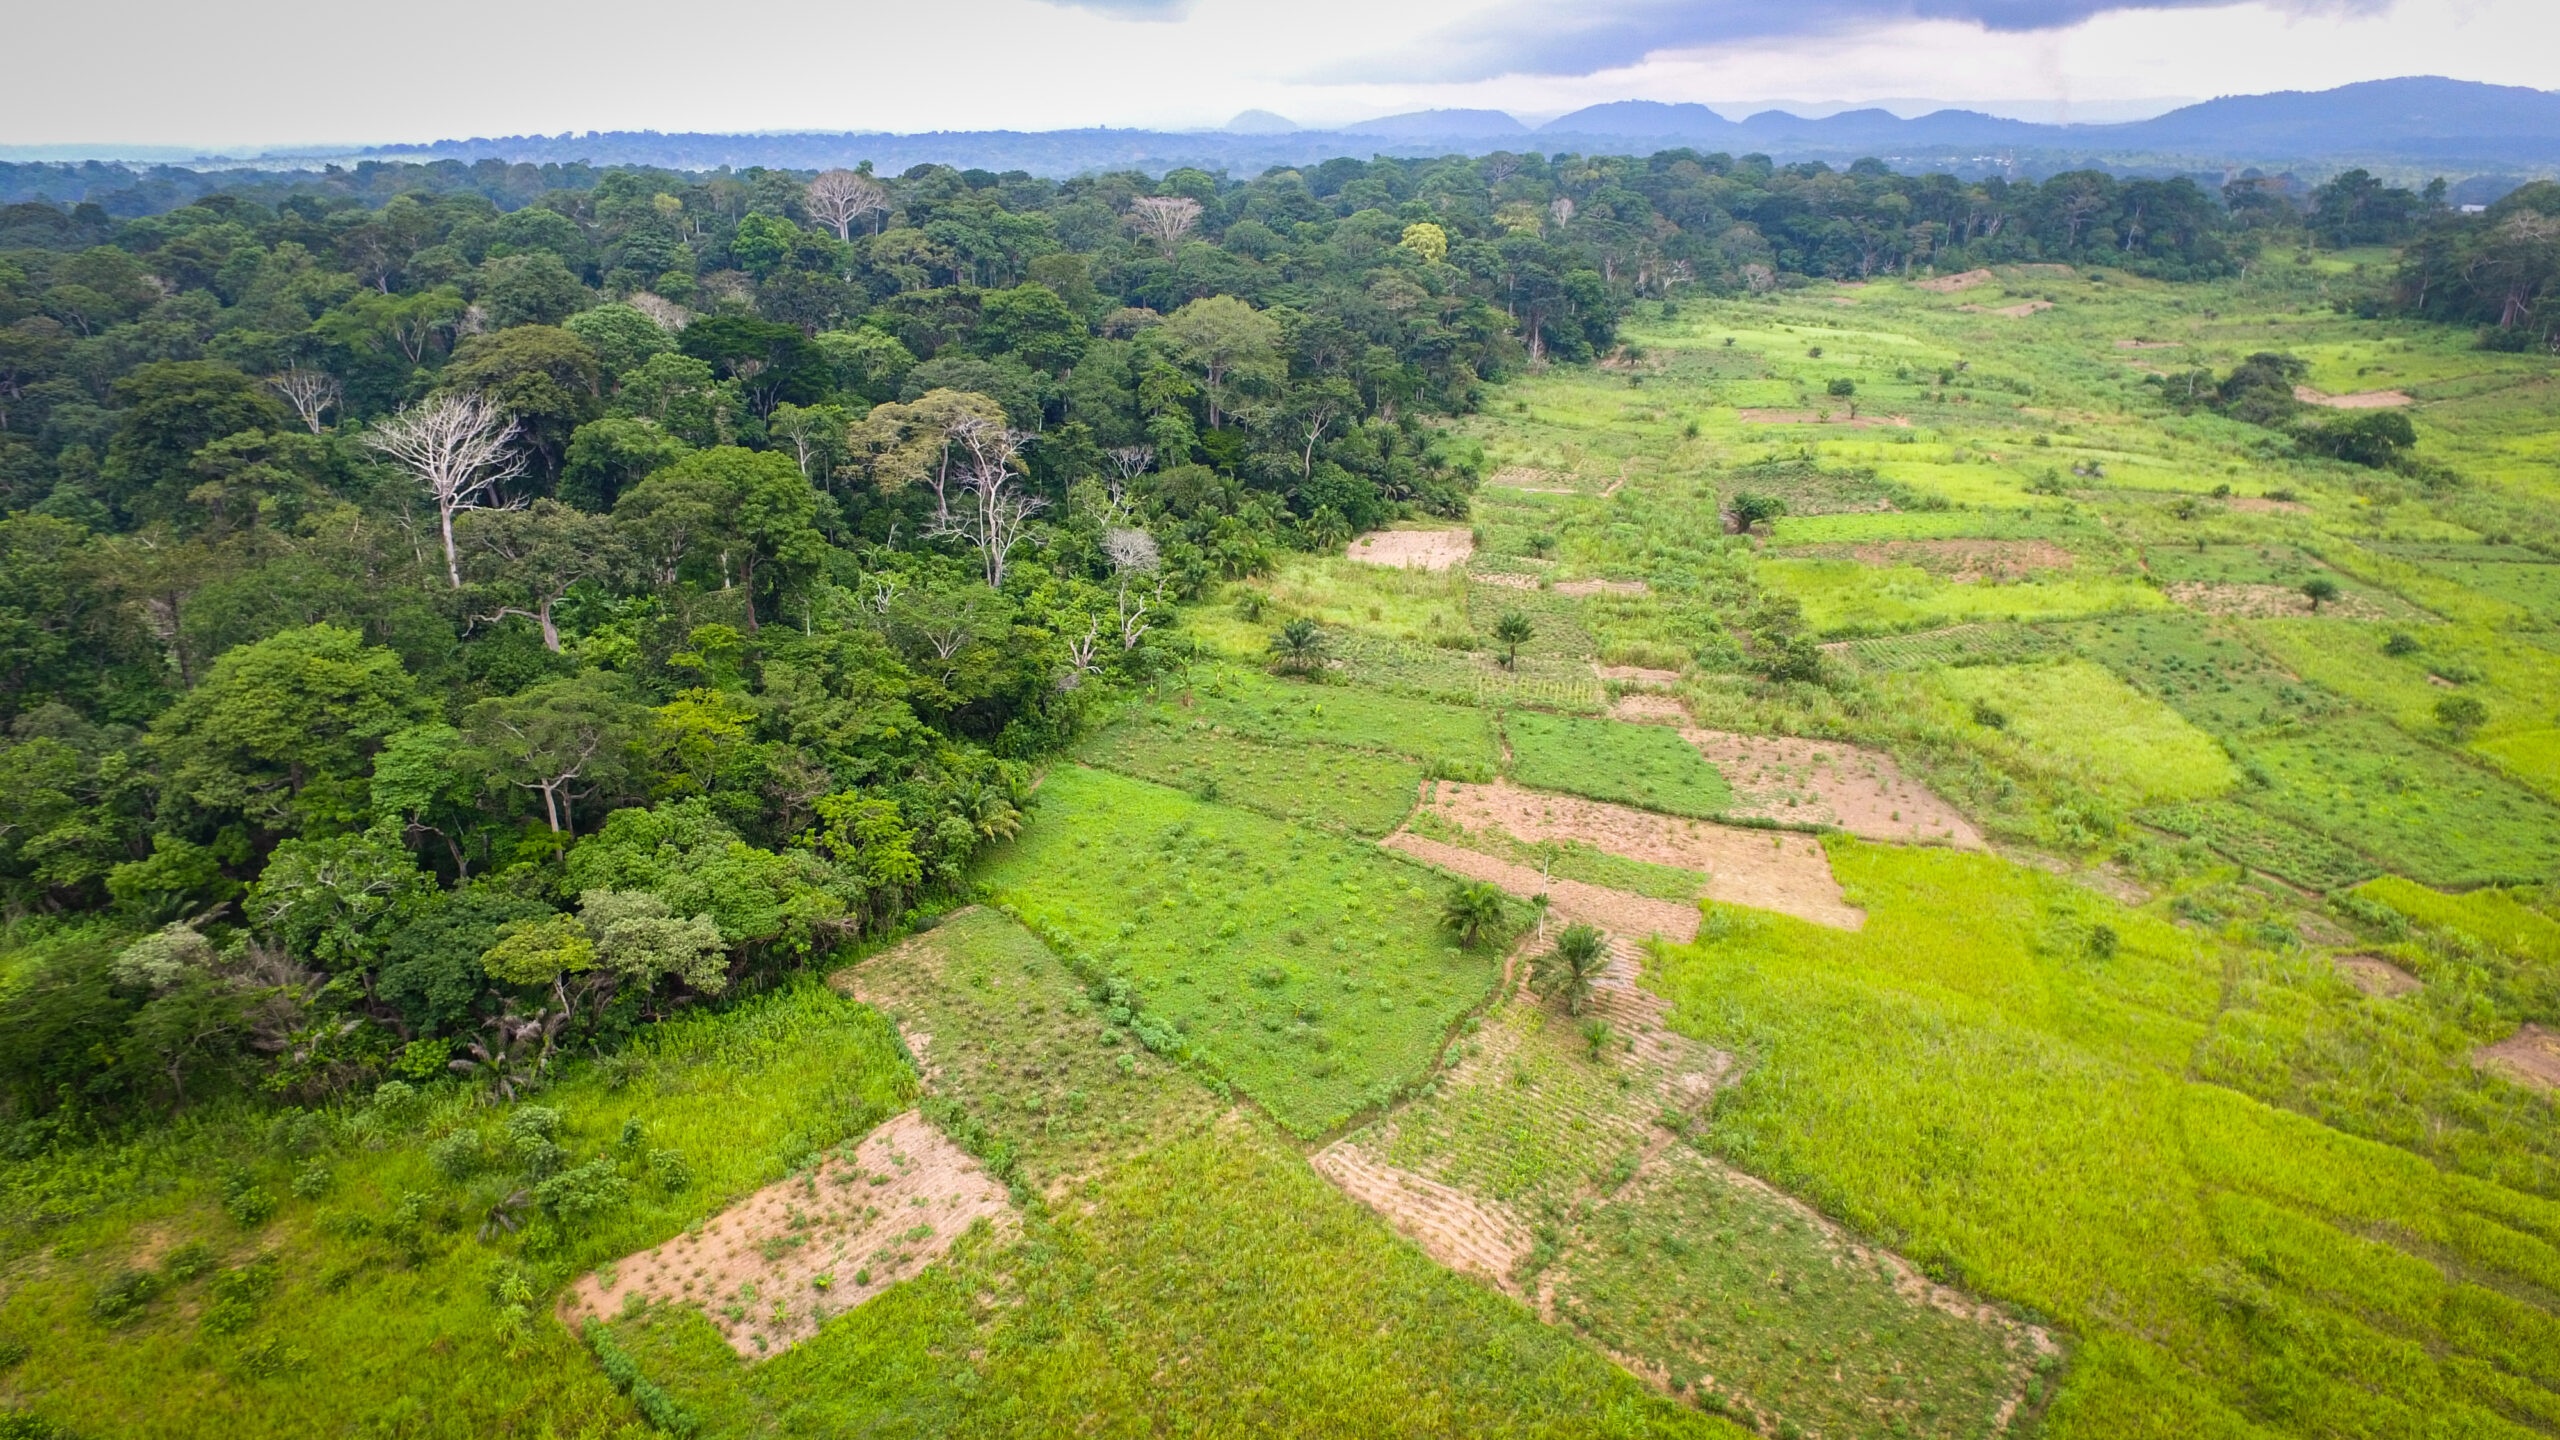 Preserving the : Strategies to Reduce Deforestation in Rural